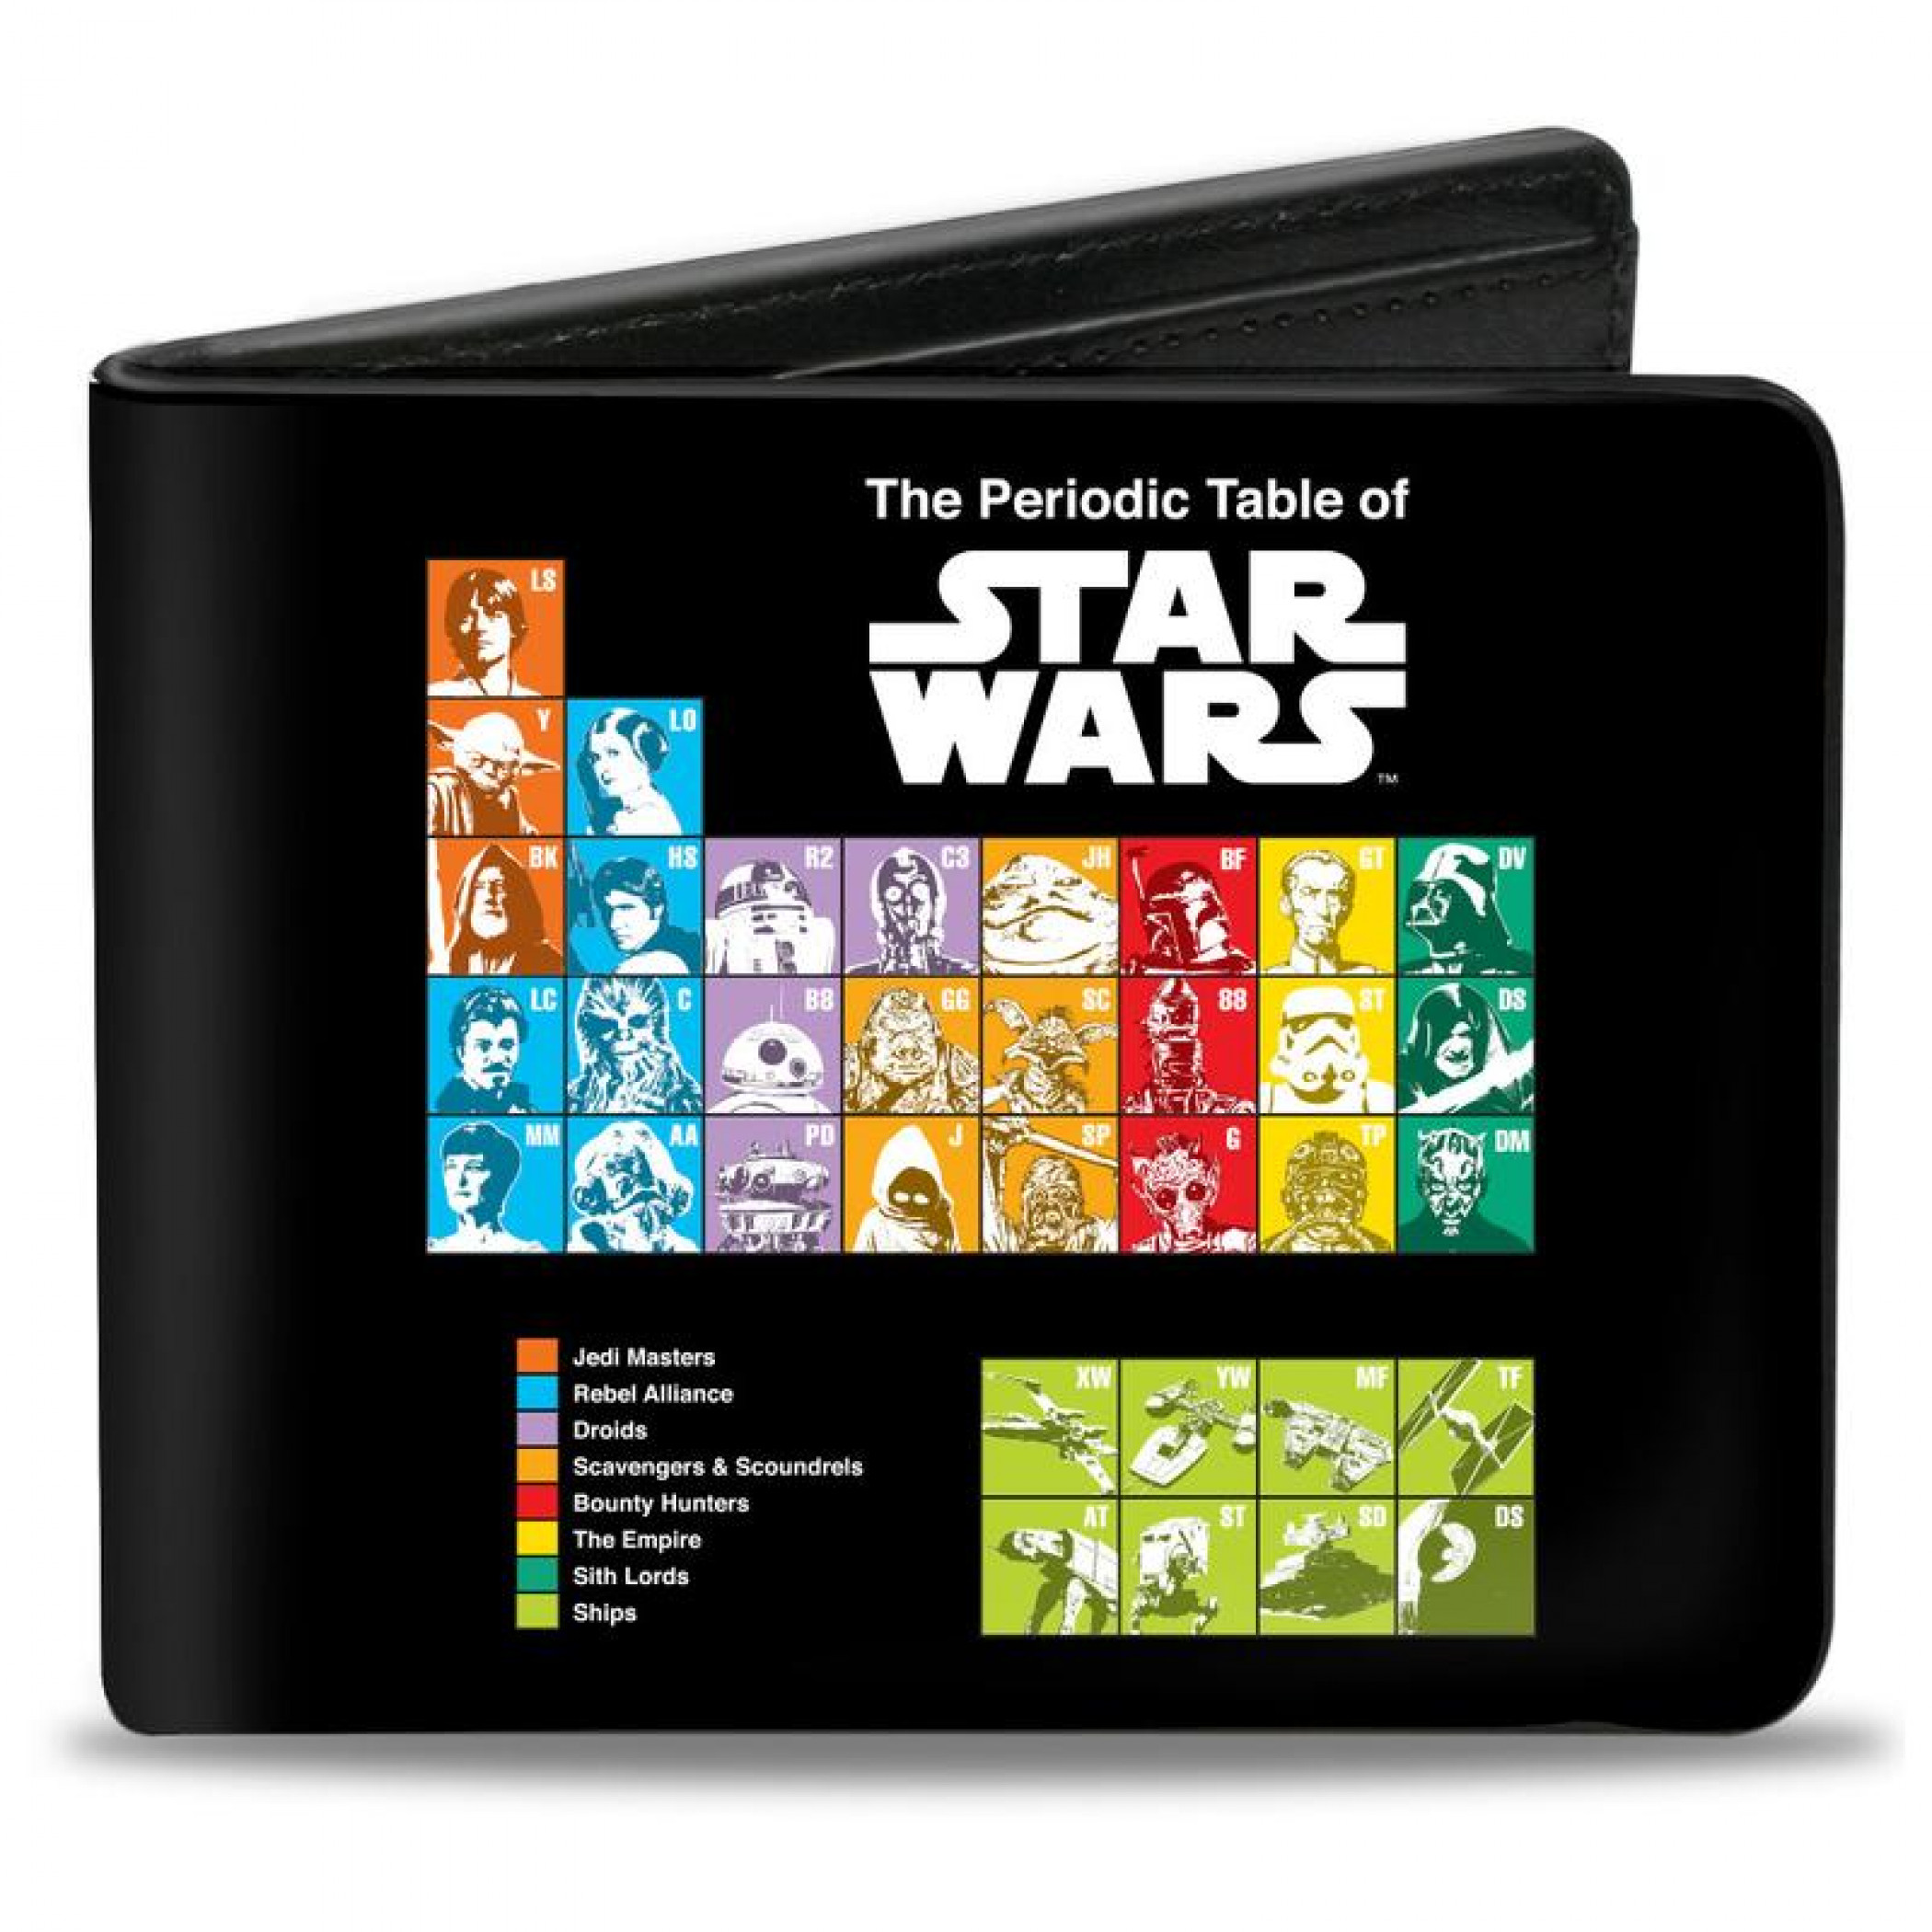 Star Wars Periodic Table of Characters Bi-Fold Wallet